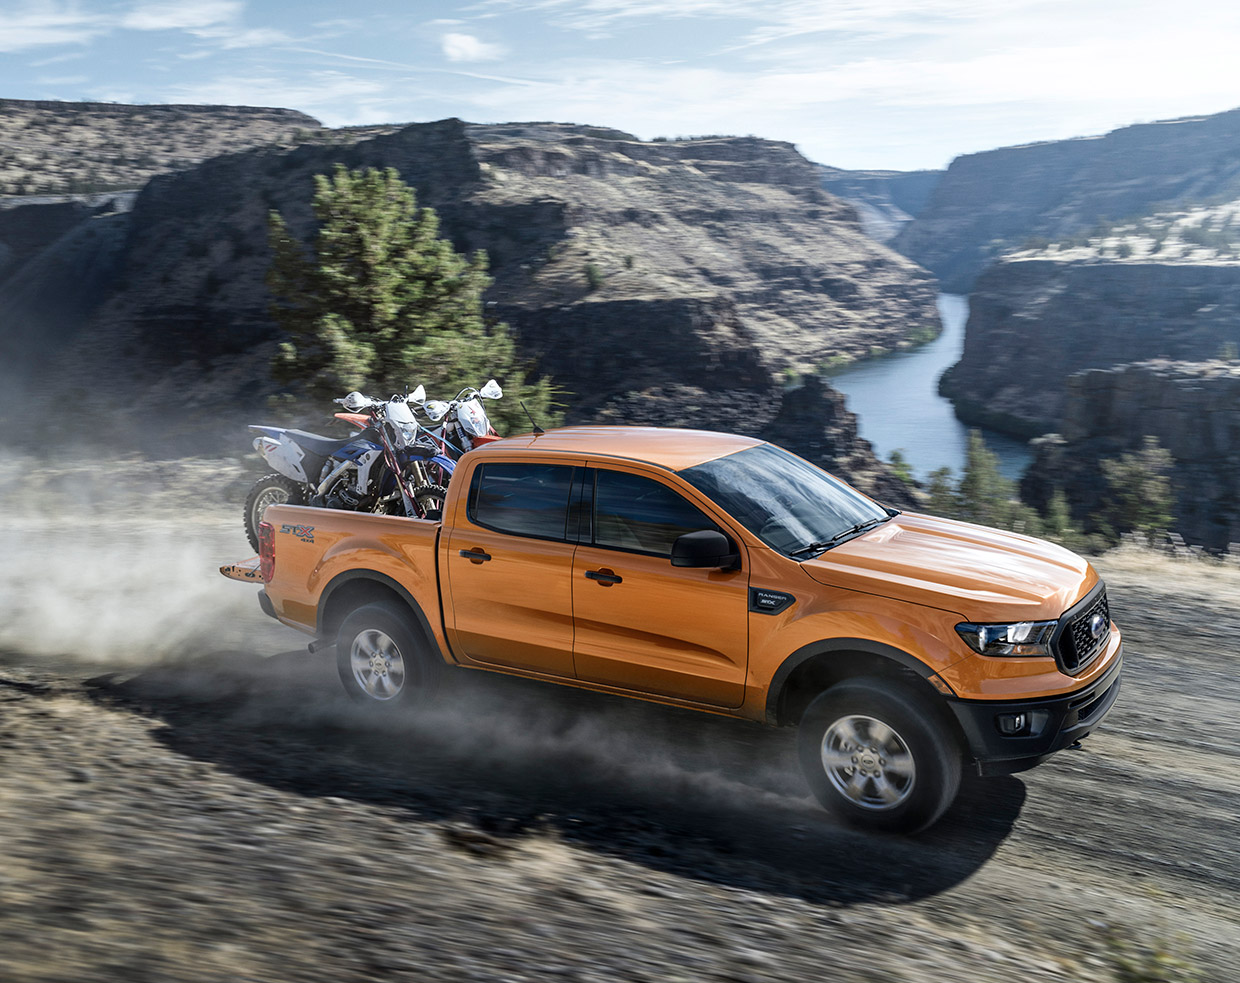 2019 Ford Ranger EcoBoost Four Cranks Up the Torque